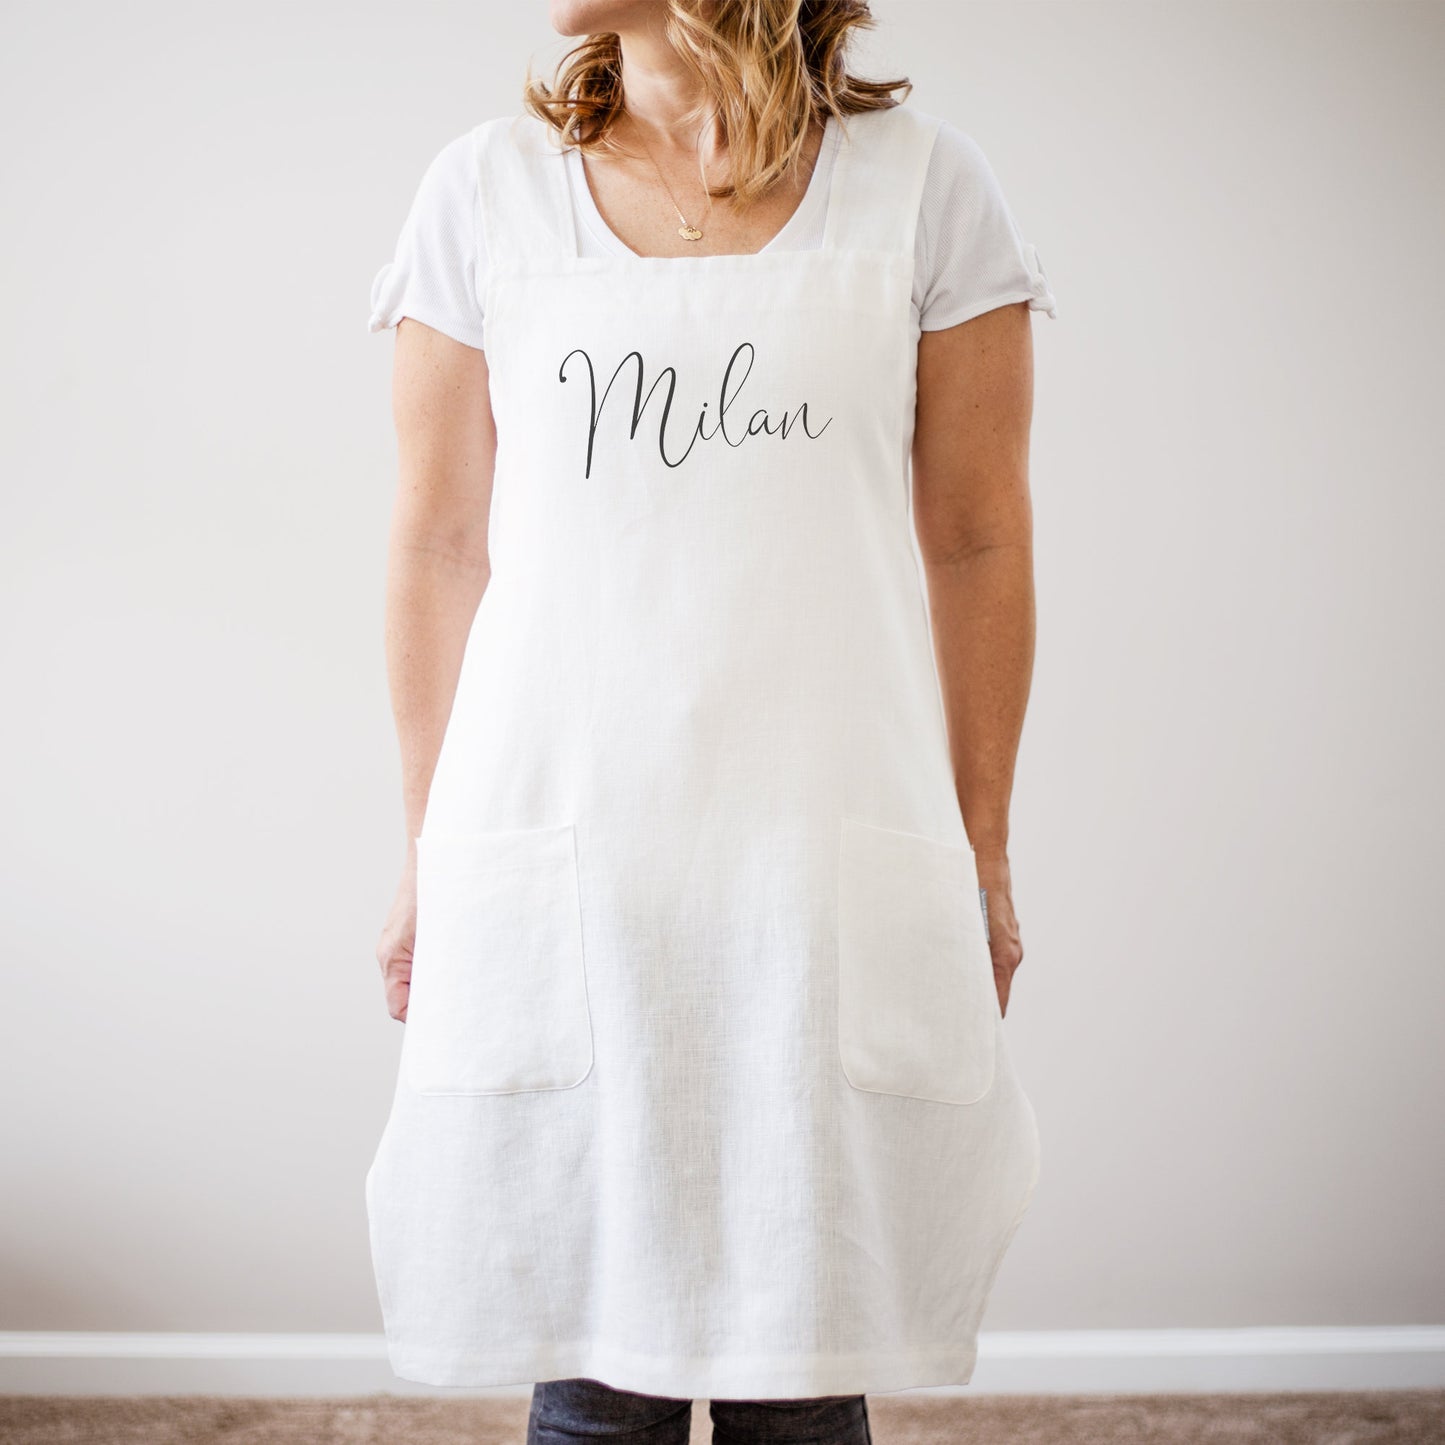 Load image into Gallery viewer, Personalized Linen Apron | Kitchen Apron | Pinafore Apron | Full Kitchen Apron | Custom Monogram Apron | 100% Linen Full Apron | No Ties
